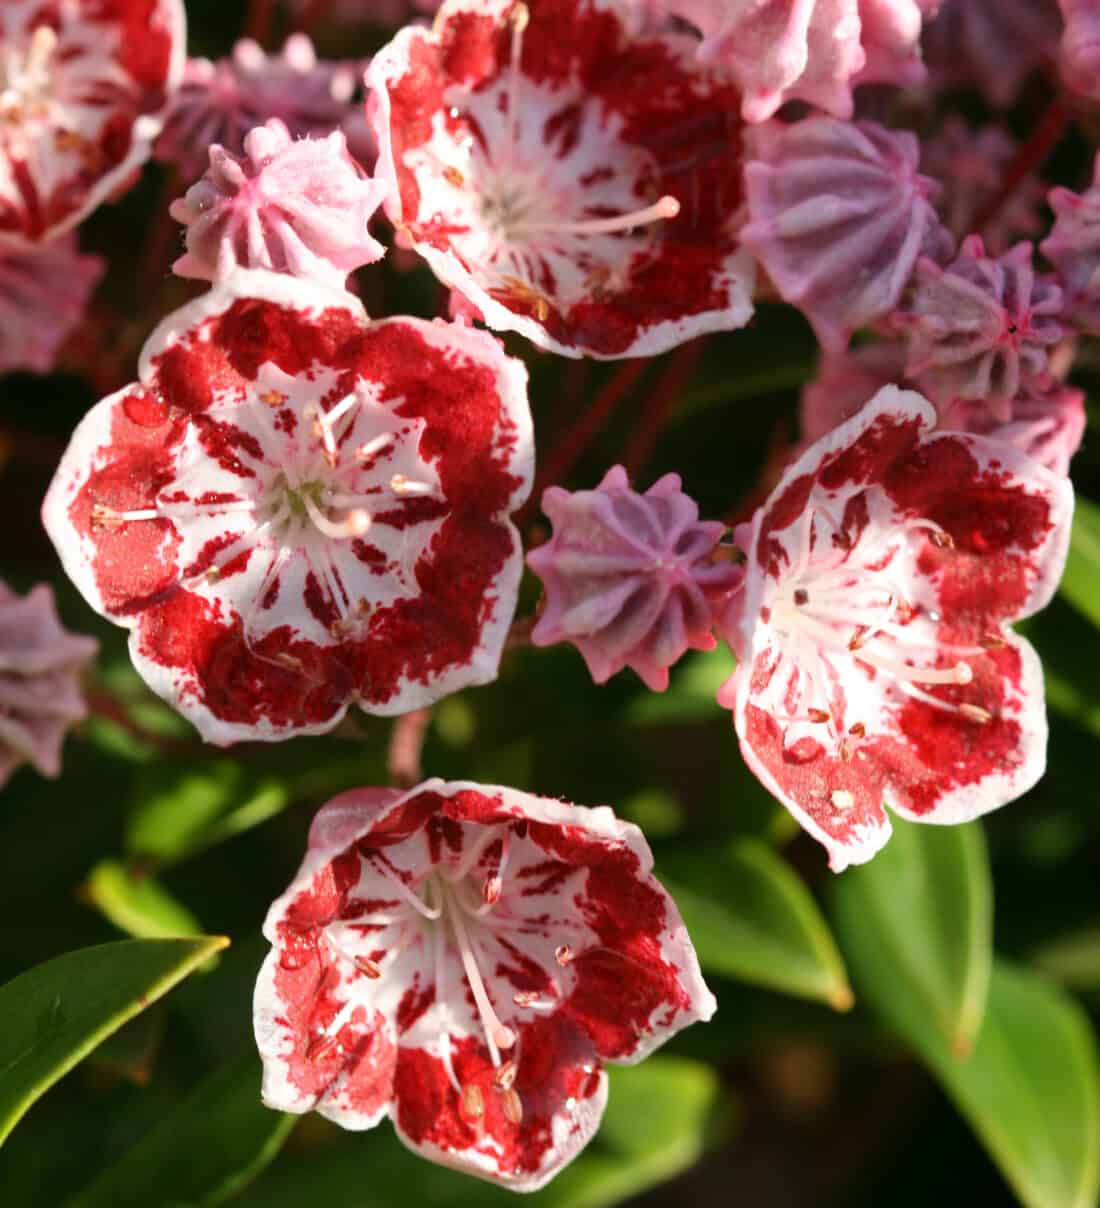 A close up of some red and white flowers.